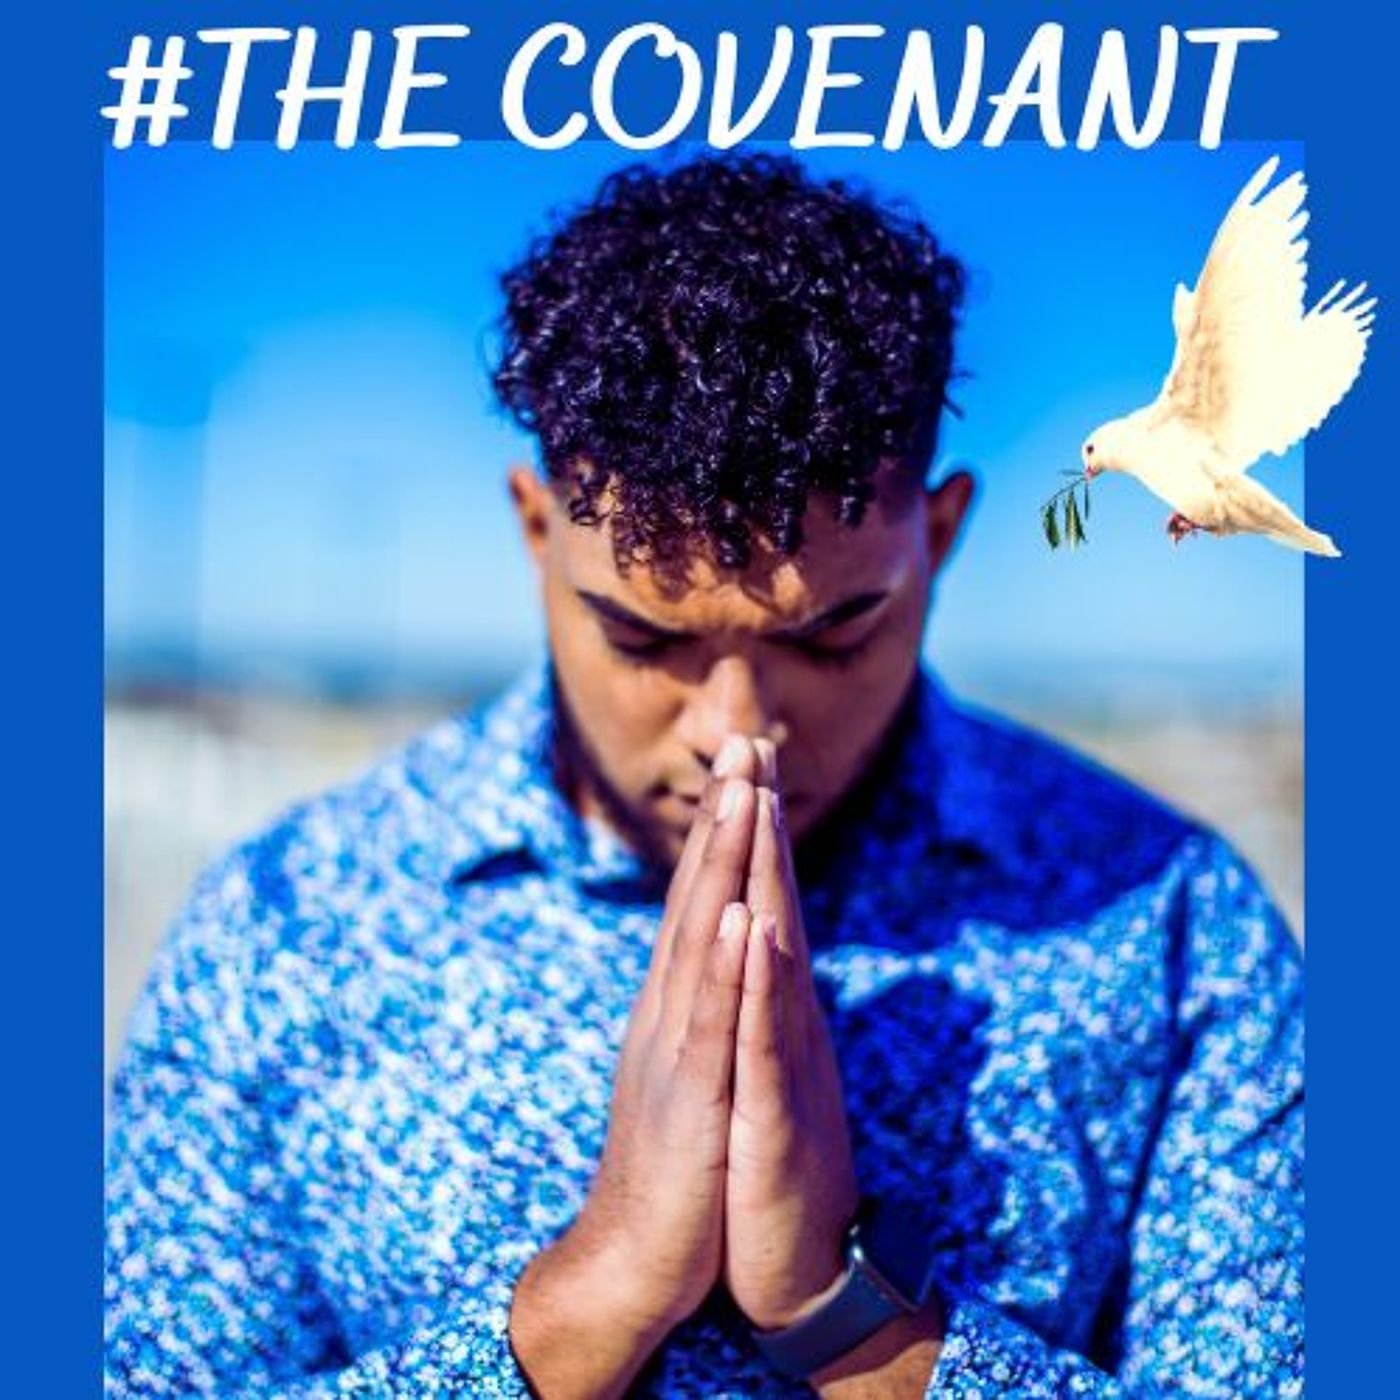 #THE COVENANT!